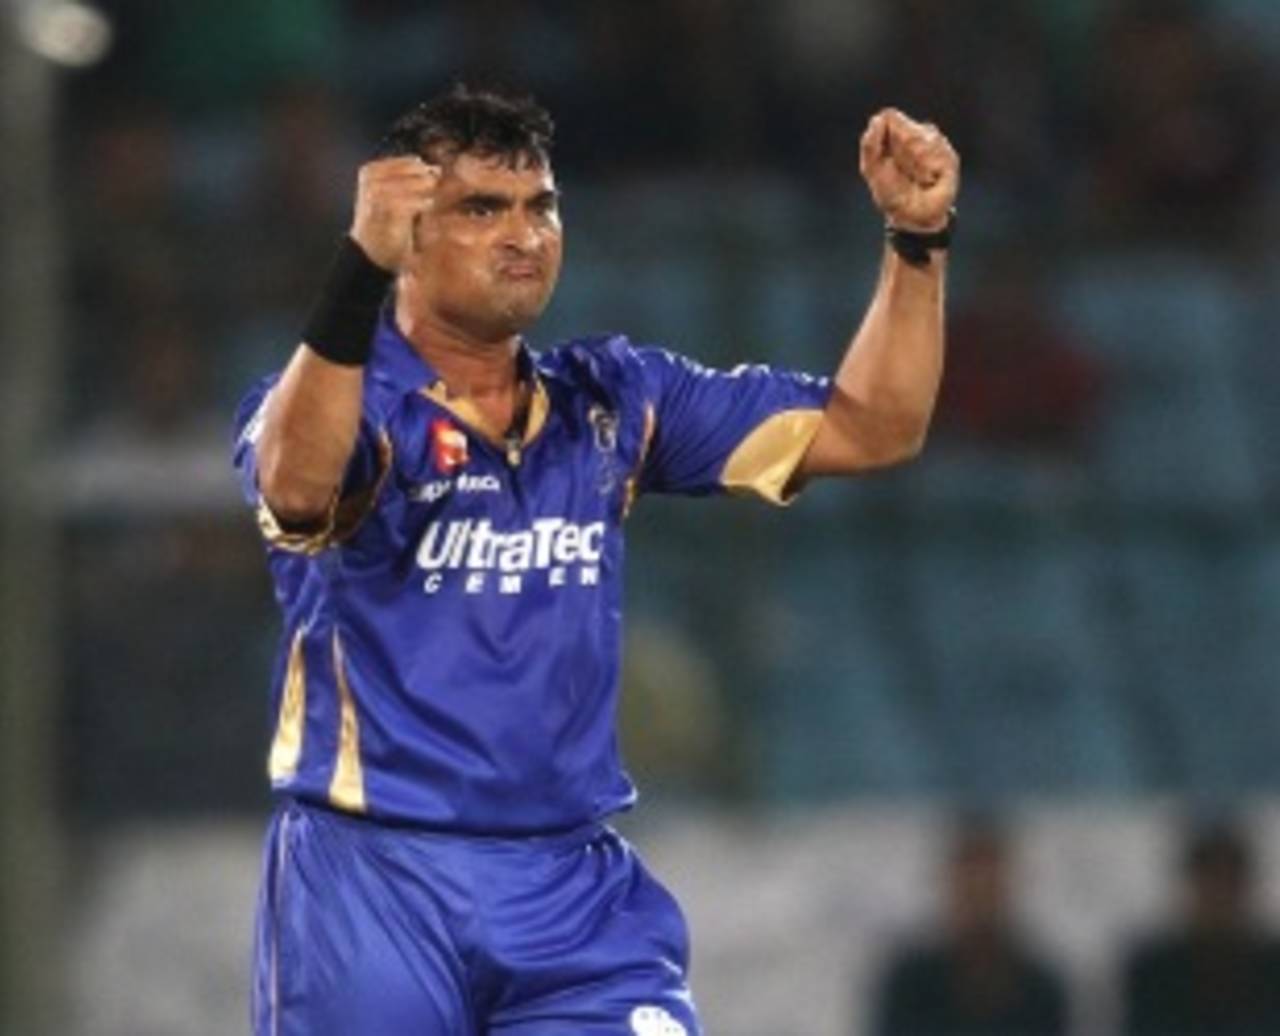 Pravin Tambe took 12 wickets in the Champions League at an average of 6.50 and a strike rate of 9.5&nbsp;&nbsp;&bull;&nbsp;&nbsp;BCCI